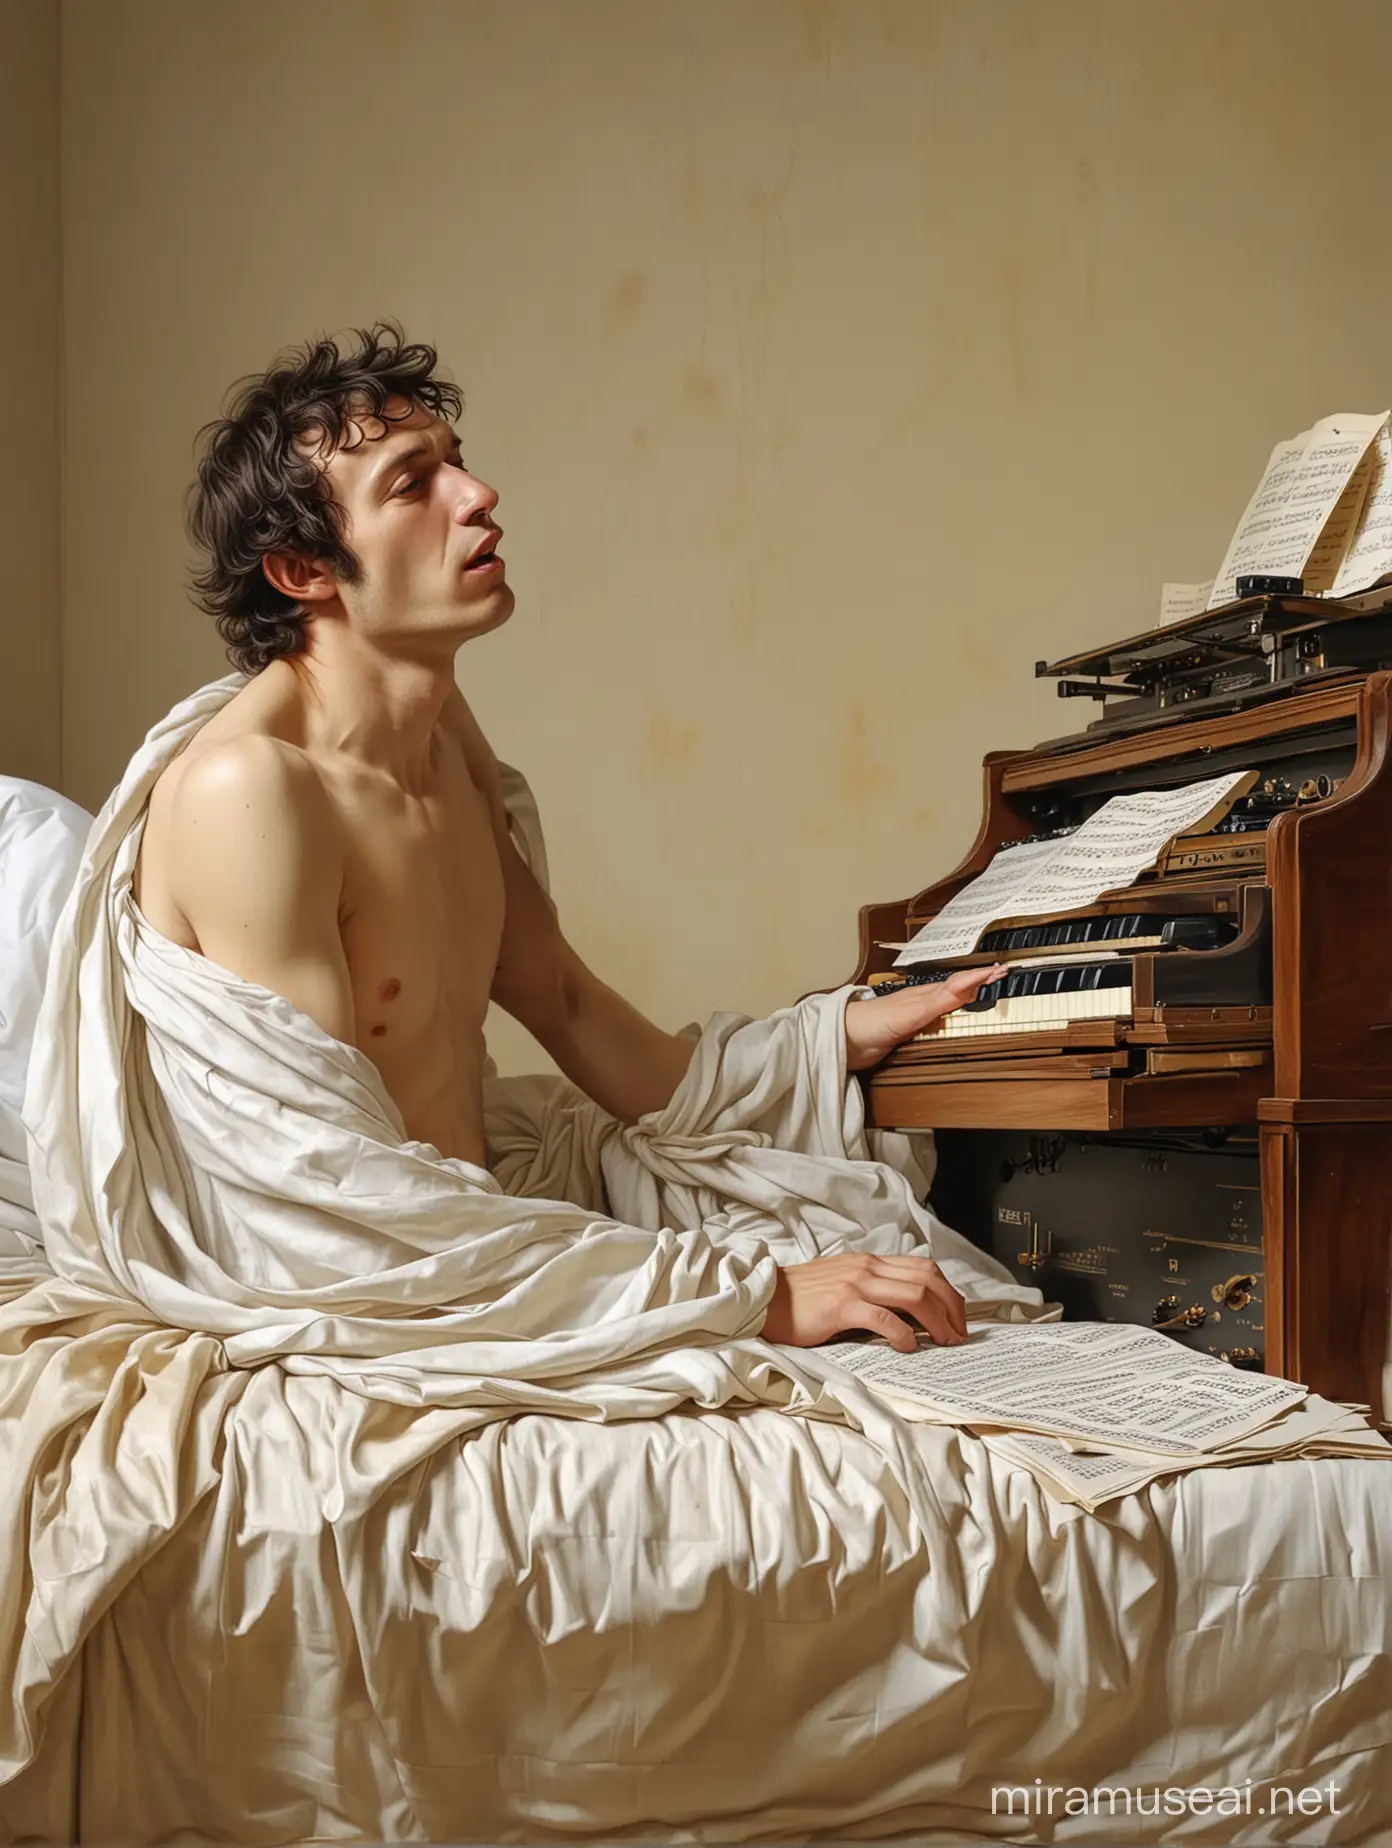 Highly detailed painting based closely on (("The Death of Marat" by Jacques-Louis David)), a man lies on a bed with sheet music in his hand, a ((synthesizer keyboard)) lies across the bed, use muted colors only, high quality